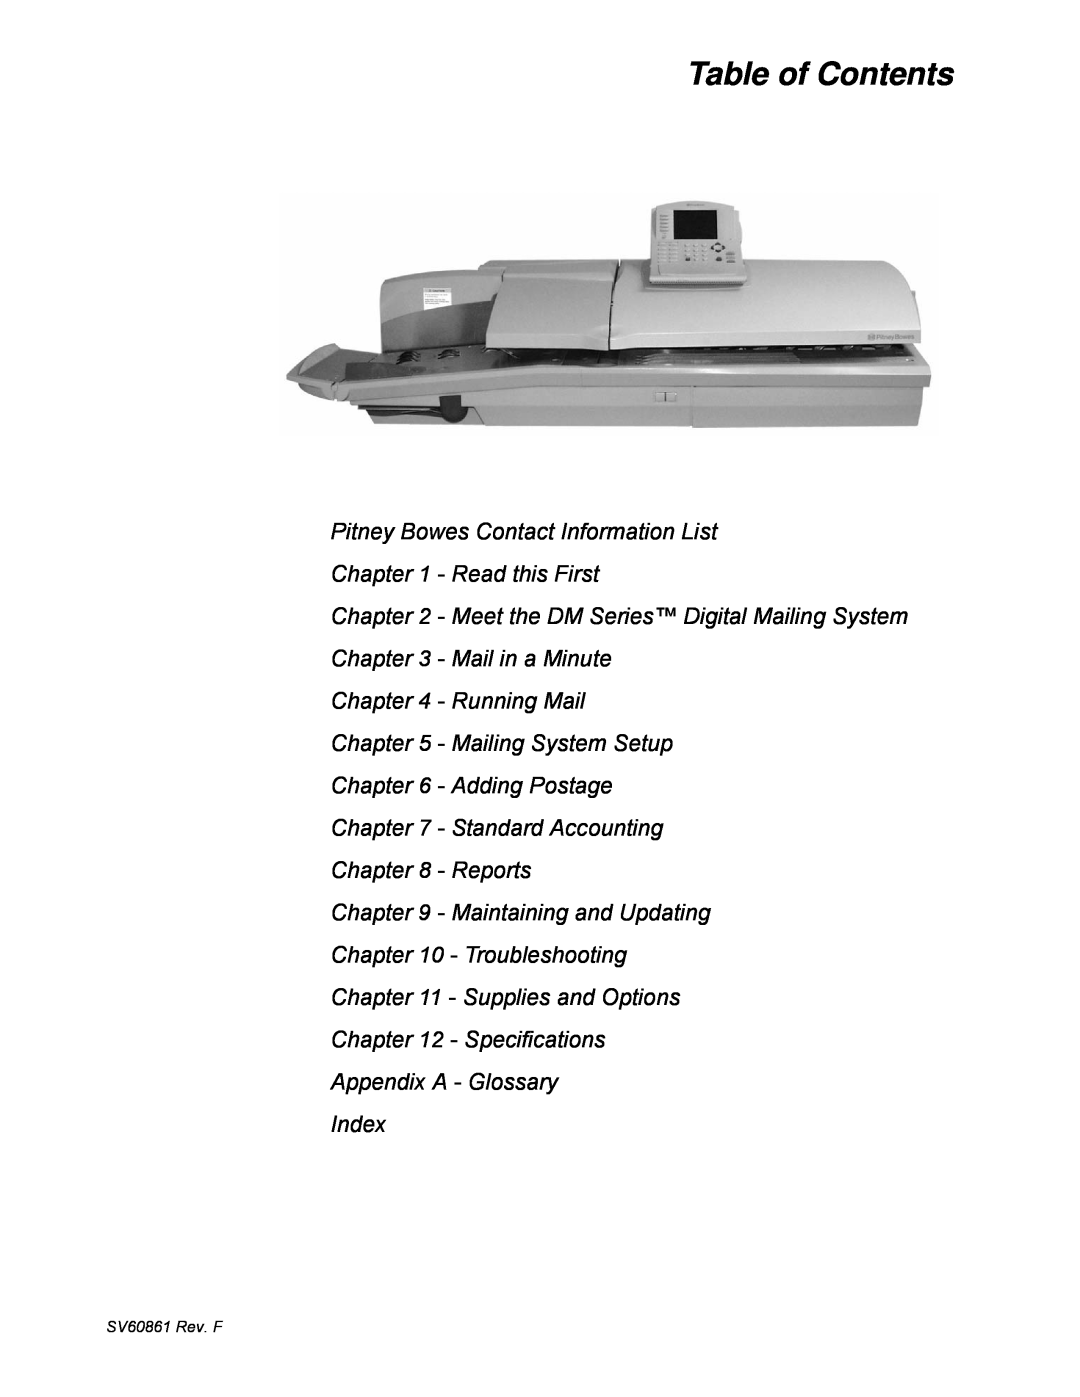 Pitney Bowes DM800, DM900 manual Table of Contents 